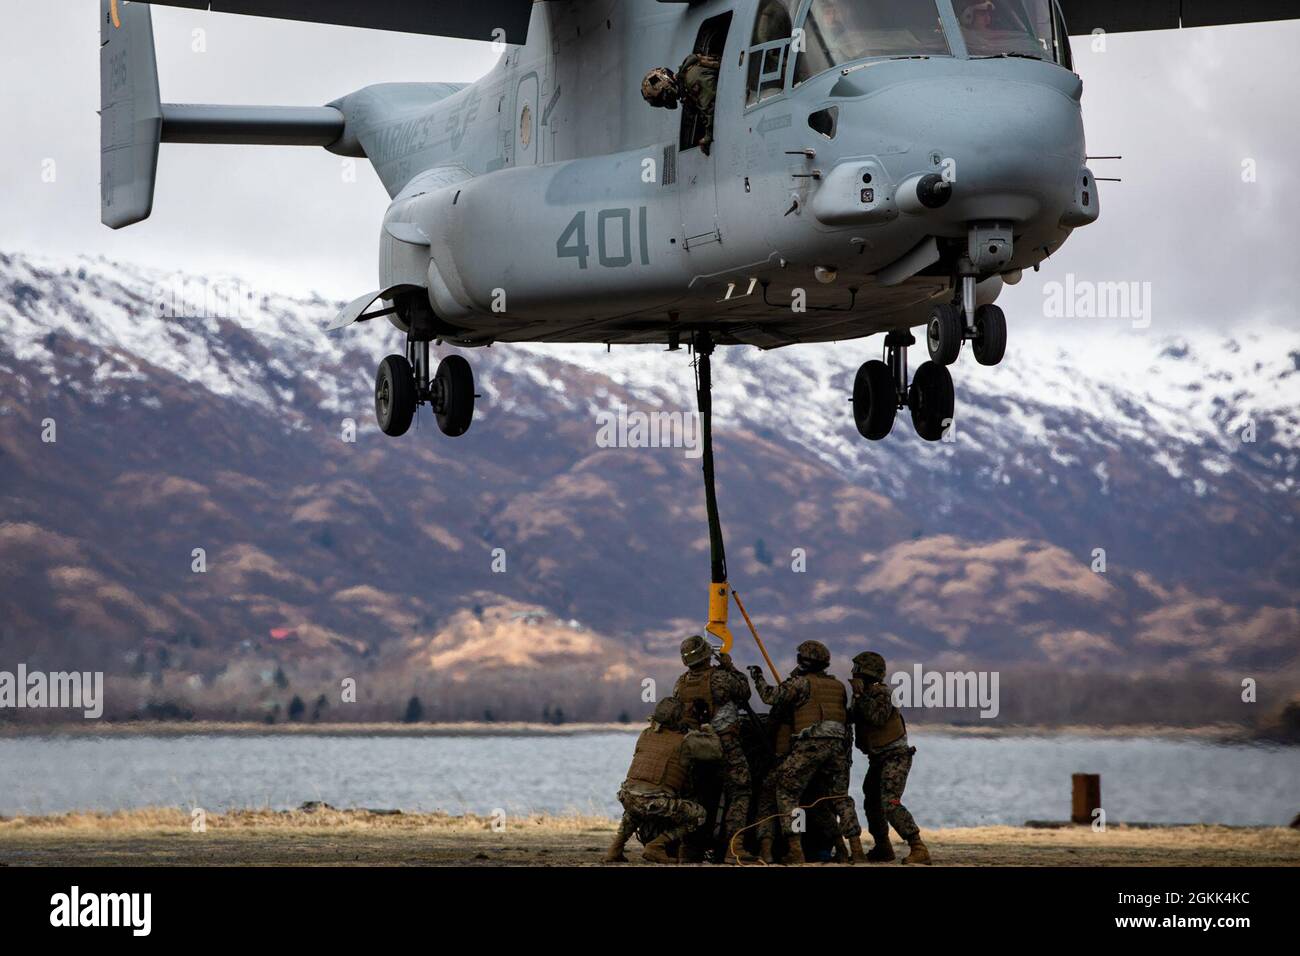 U.S. Marines with VMM-764, 4th Marine Aircraft Wing, conduct external sling loads with a MV-22 Osprey in Kodiak, Alaska on May 12, 2021. Marines with Marine Forces Reserve are currently providing all logistical support to Arctic Care 2021, which is a joint service training mission that provides no-cost medical care to the people of Kodiak, Alaska. Stock Photo